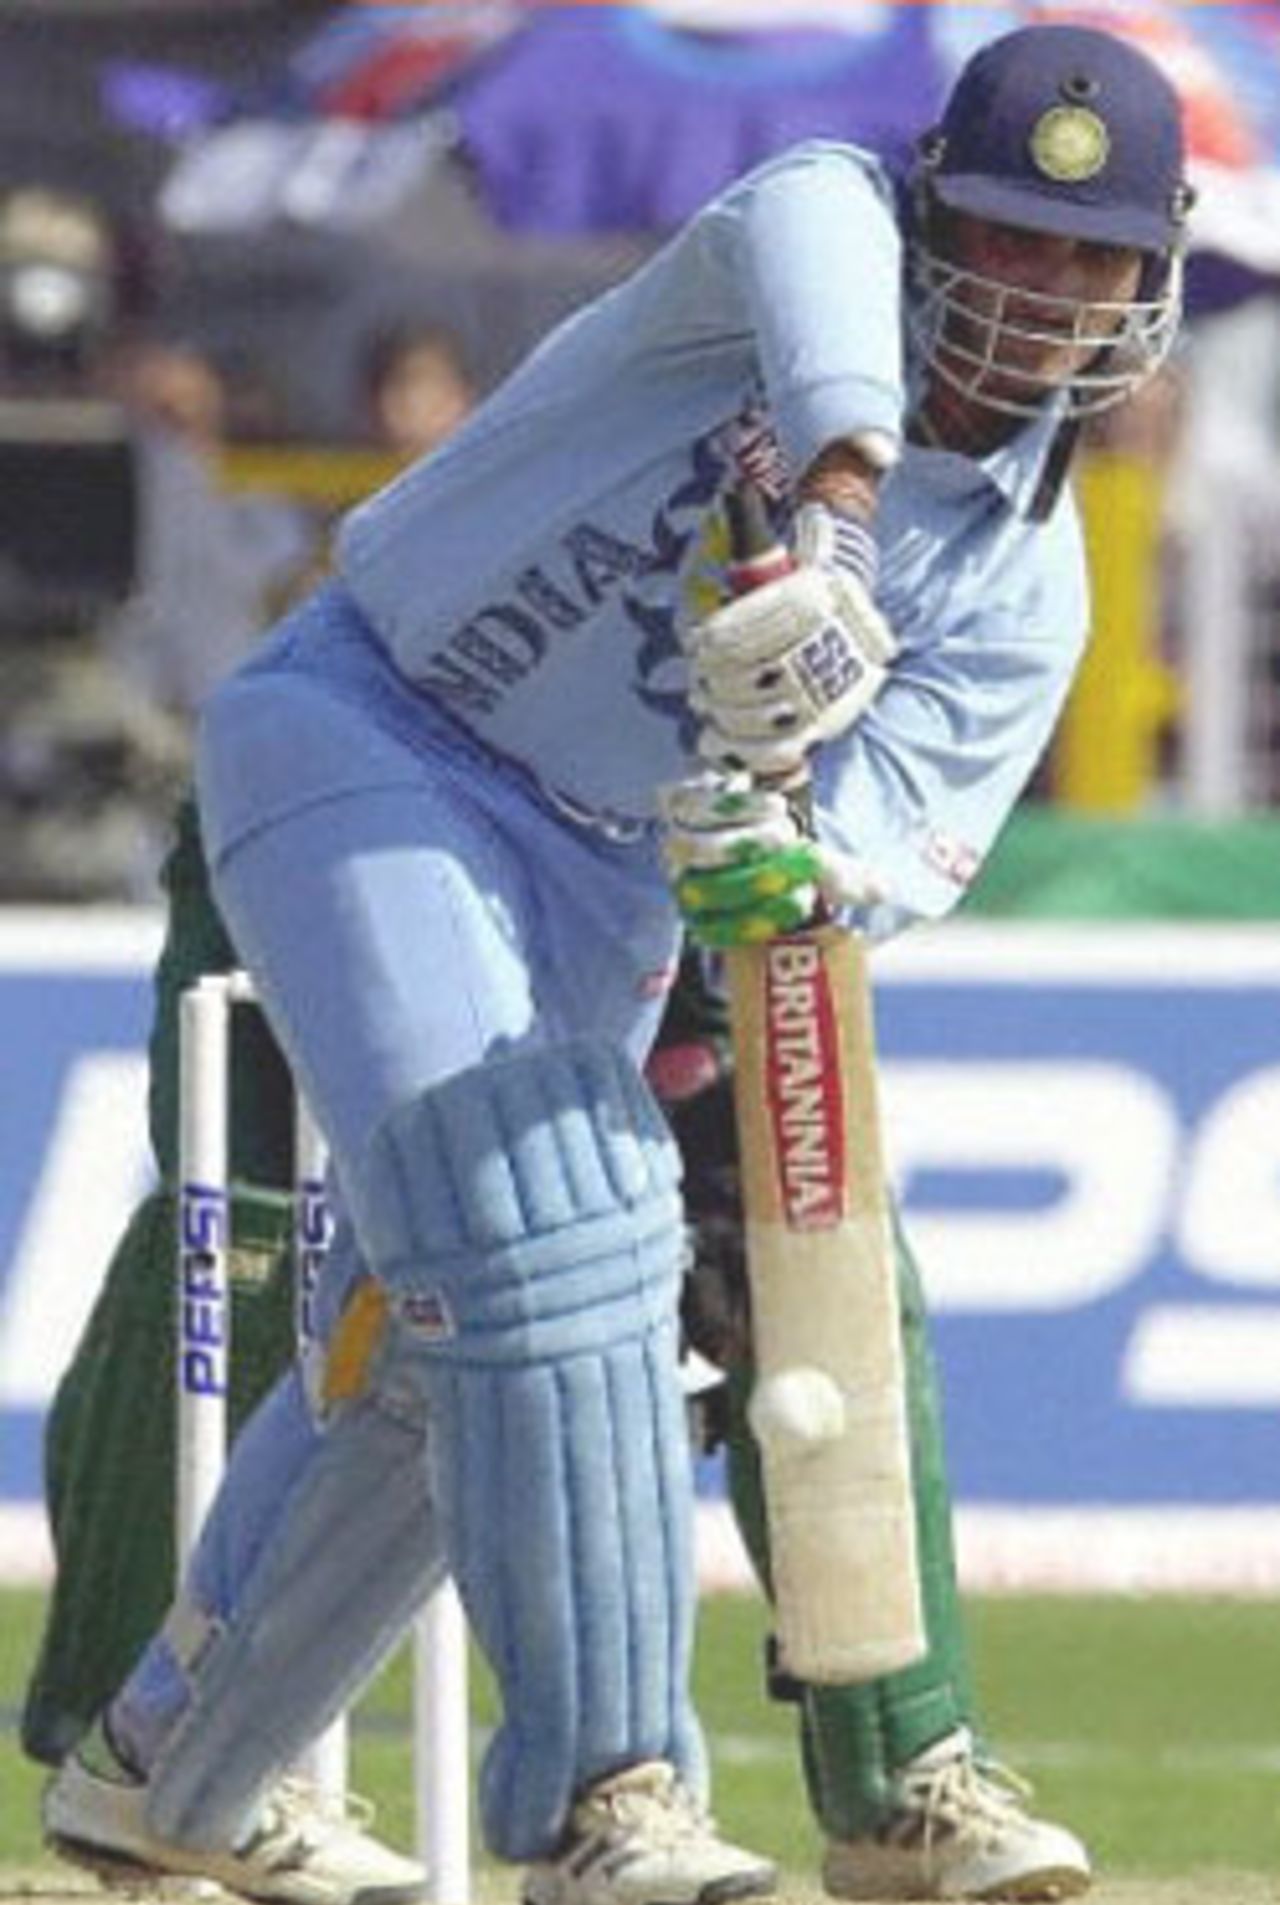 Indian captain and opening batsman Saurav Ganguly, blocks a delivery on his way to scoring a quick 56 runs during the one-day cricket international between India and South Africa, 15 March 2000 in Faridabad. South Africa are chasing India's challenging 248. In the background is South African wicket keeper Mark Boucher.